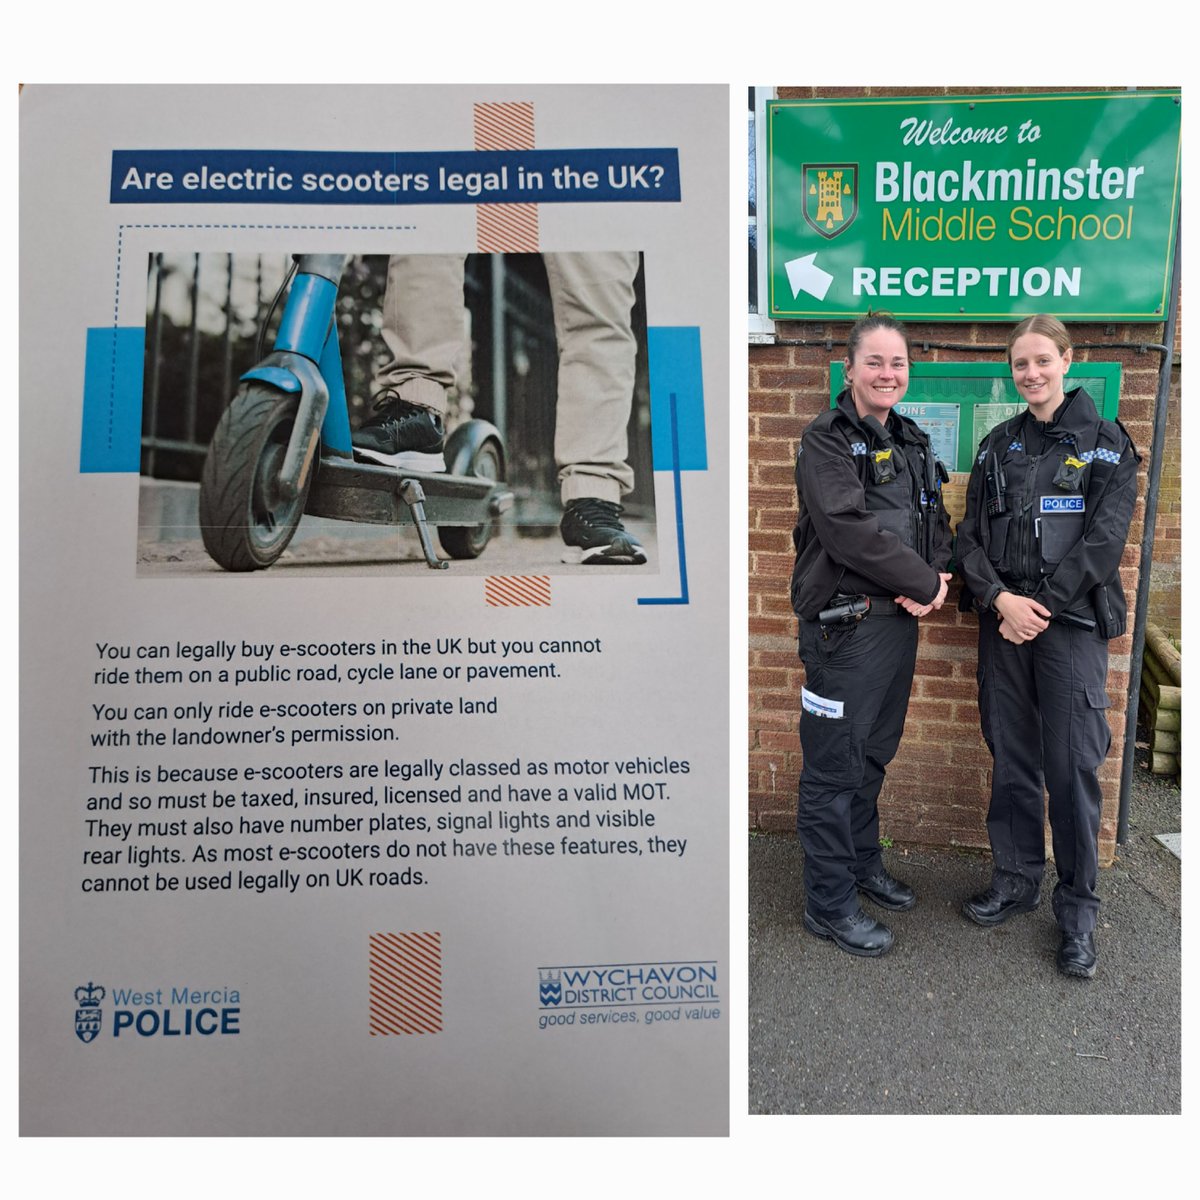 PC Prentice and PC Lane attended @BMiddleSchool  today for a drop-in session during the children’s lunch hour. Approx 40-50 students attended the session where we discussed E-Scooters and personal safety amongst other topics #SaferPeople #PolicingPromise 👮🏻 3879